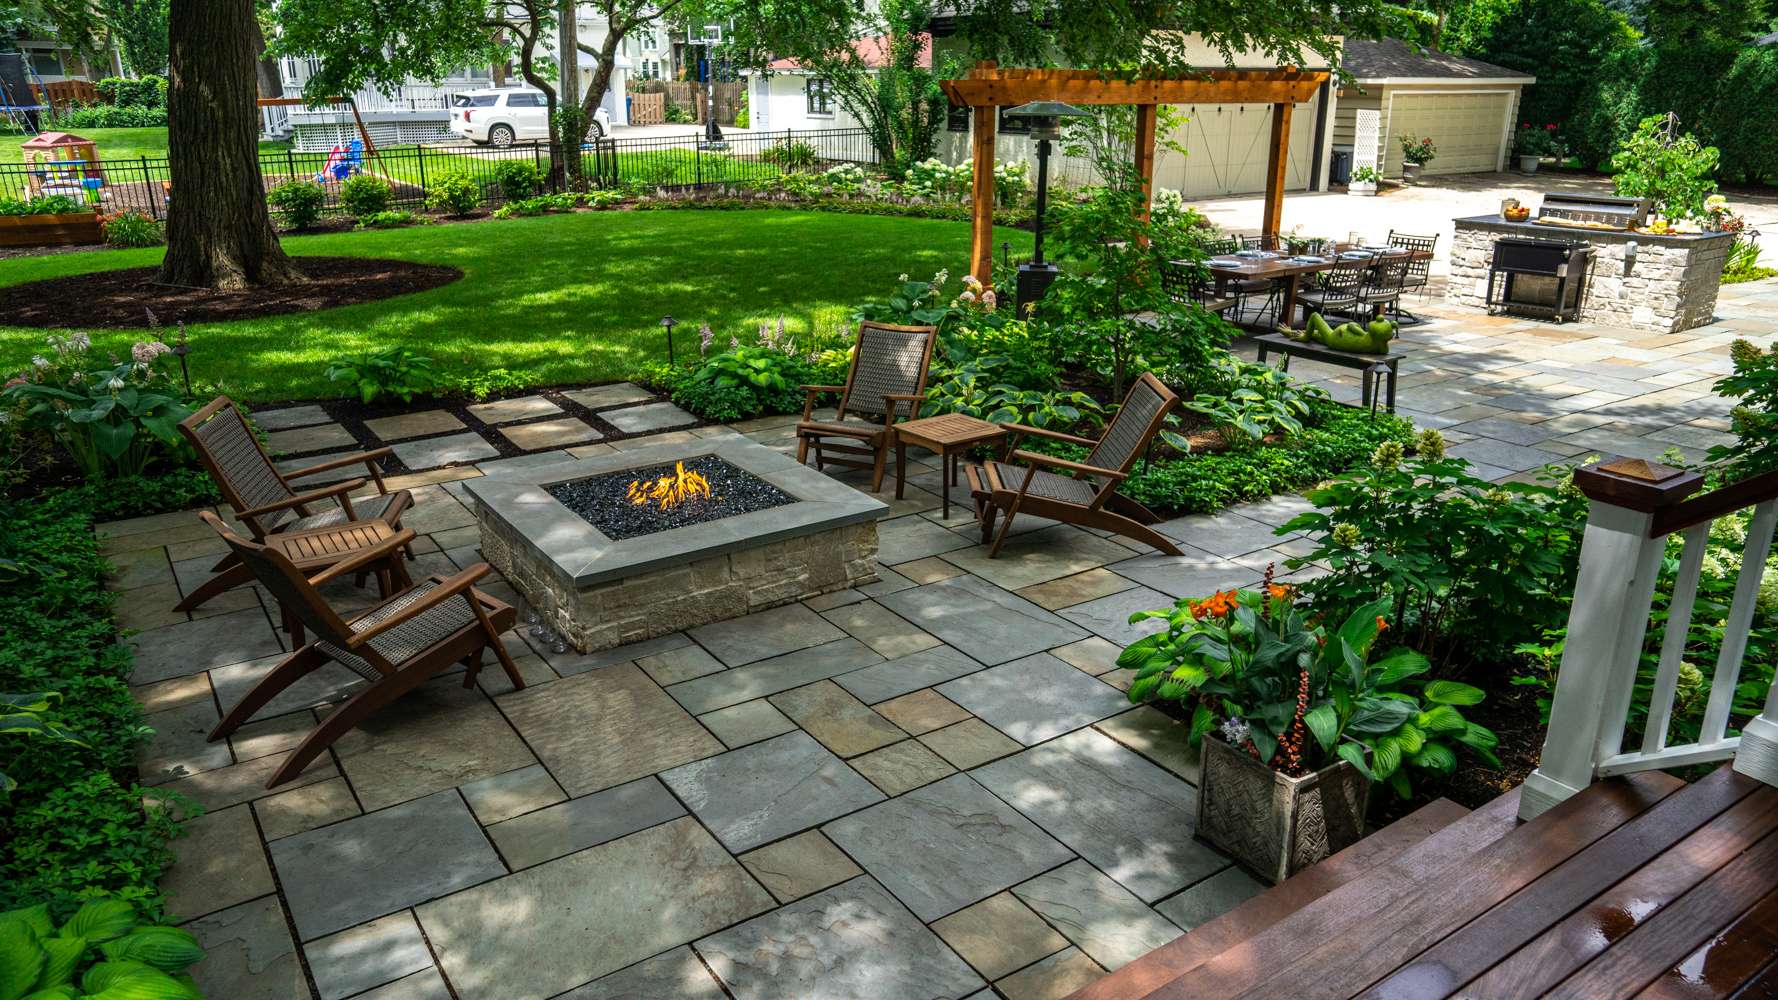 6 Outdoor Living Space Design Mistakes to Avoid